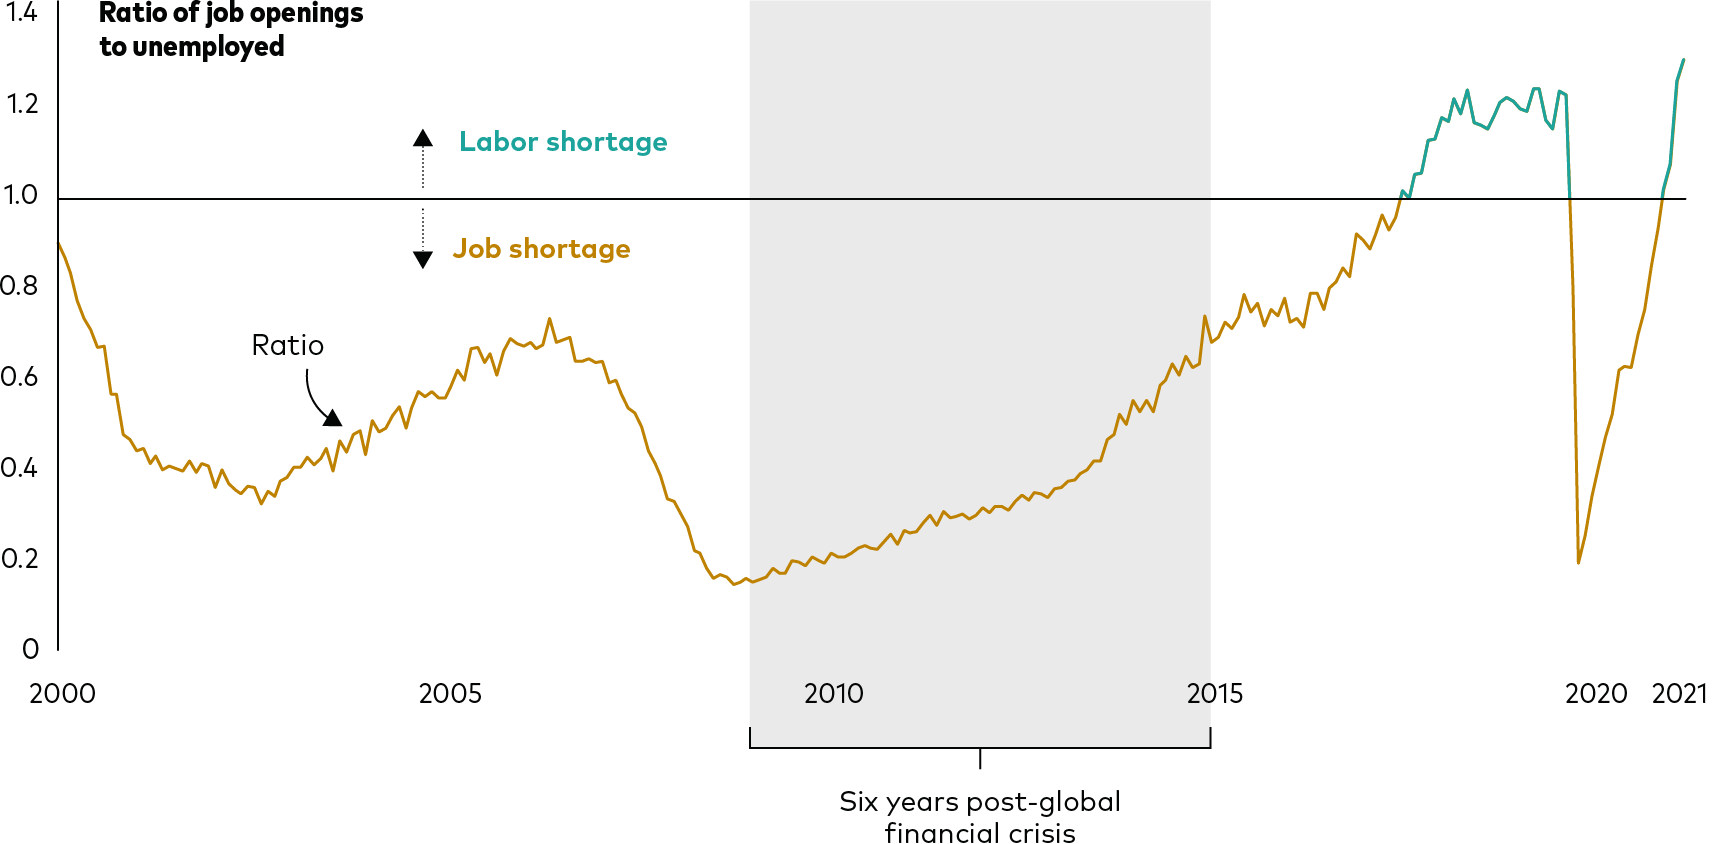 The chart depicts the ratio of job openings to unemployed workers since 2000. Ratios over 1.0 signify labor shortages, while ratios below 1.0 signify job shortages. Job shortages were prevalent for most of the period and were at their greatest at the start of the global financial crisis. Labor shortages have become the rule in the last several years, interrupted briefly by the onset of the COVID-19 pandemic but now back to an all-time high.